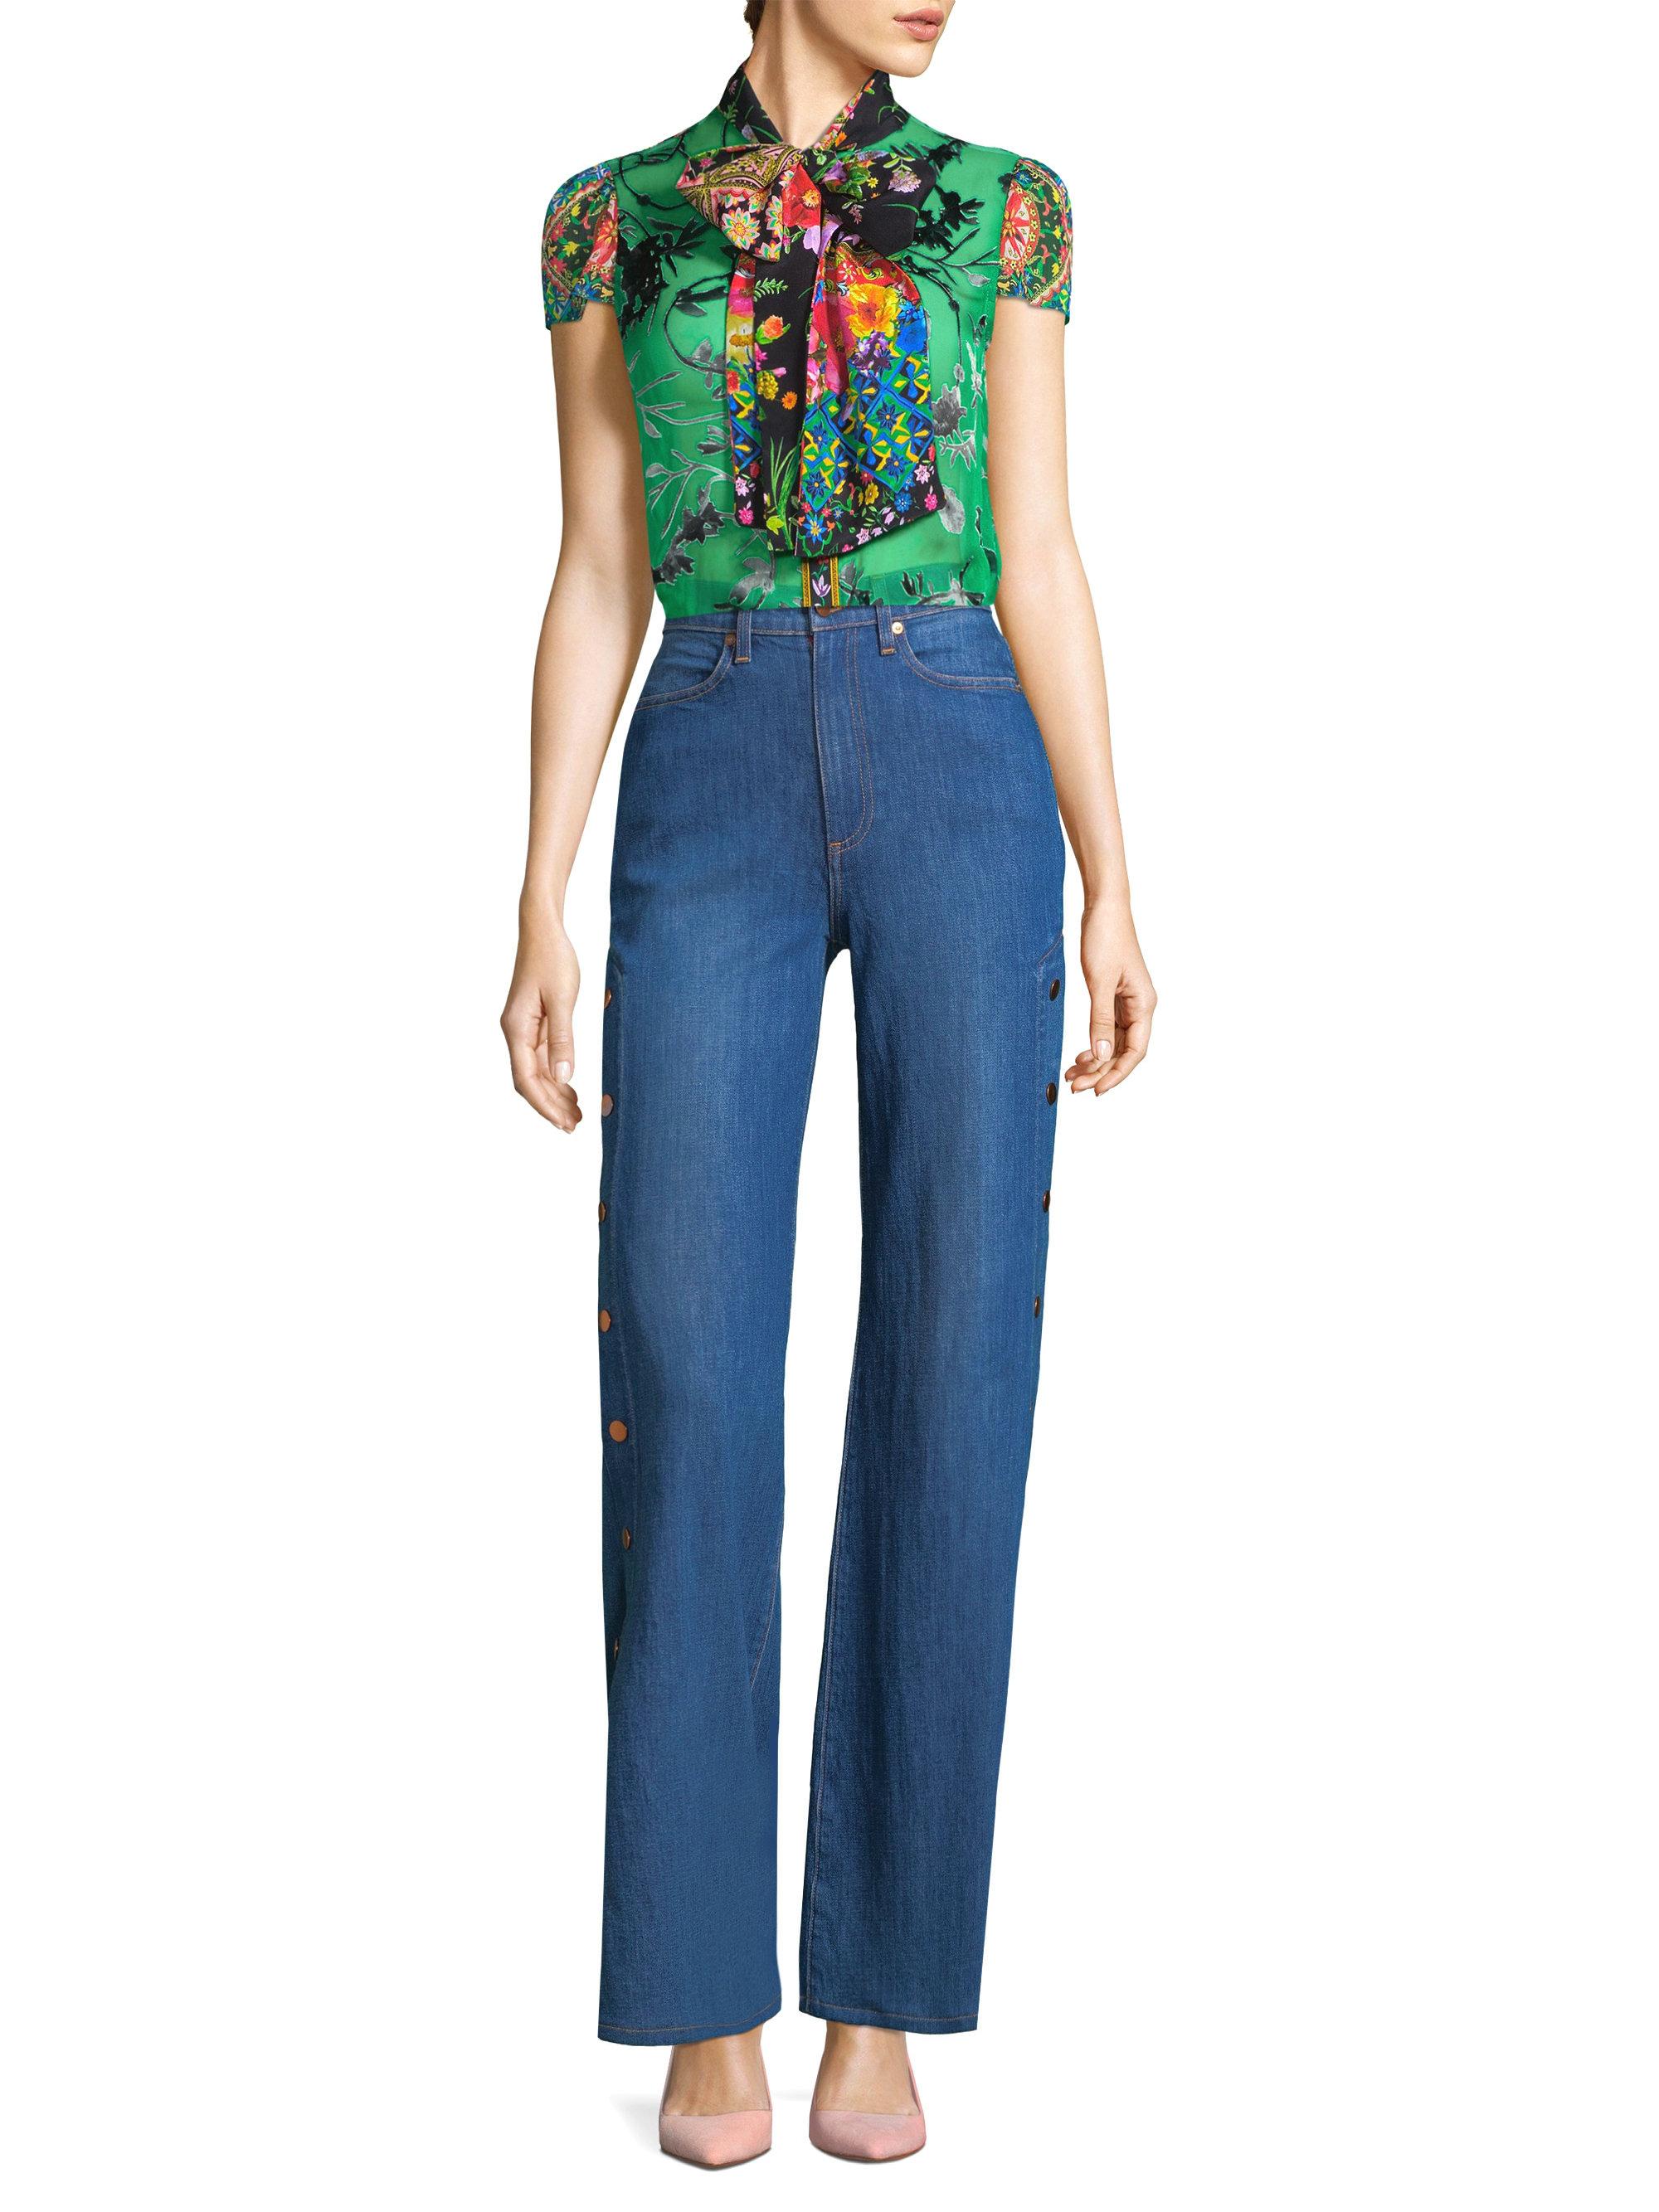 Alice + Olivia Silk Jeannie Bow Collar Floral Blouse in Green | Lyst